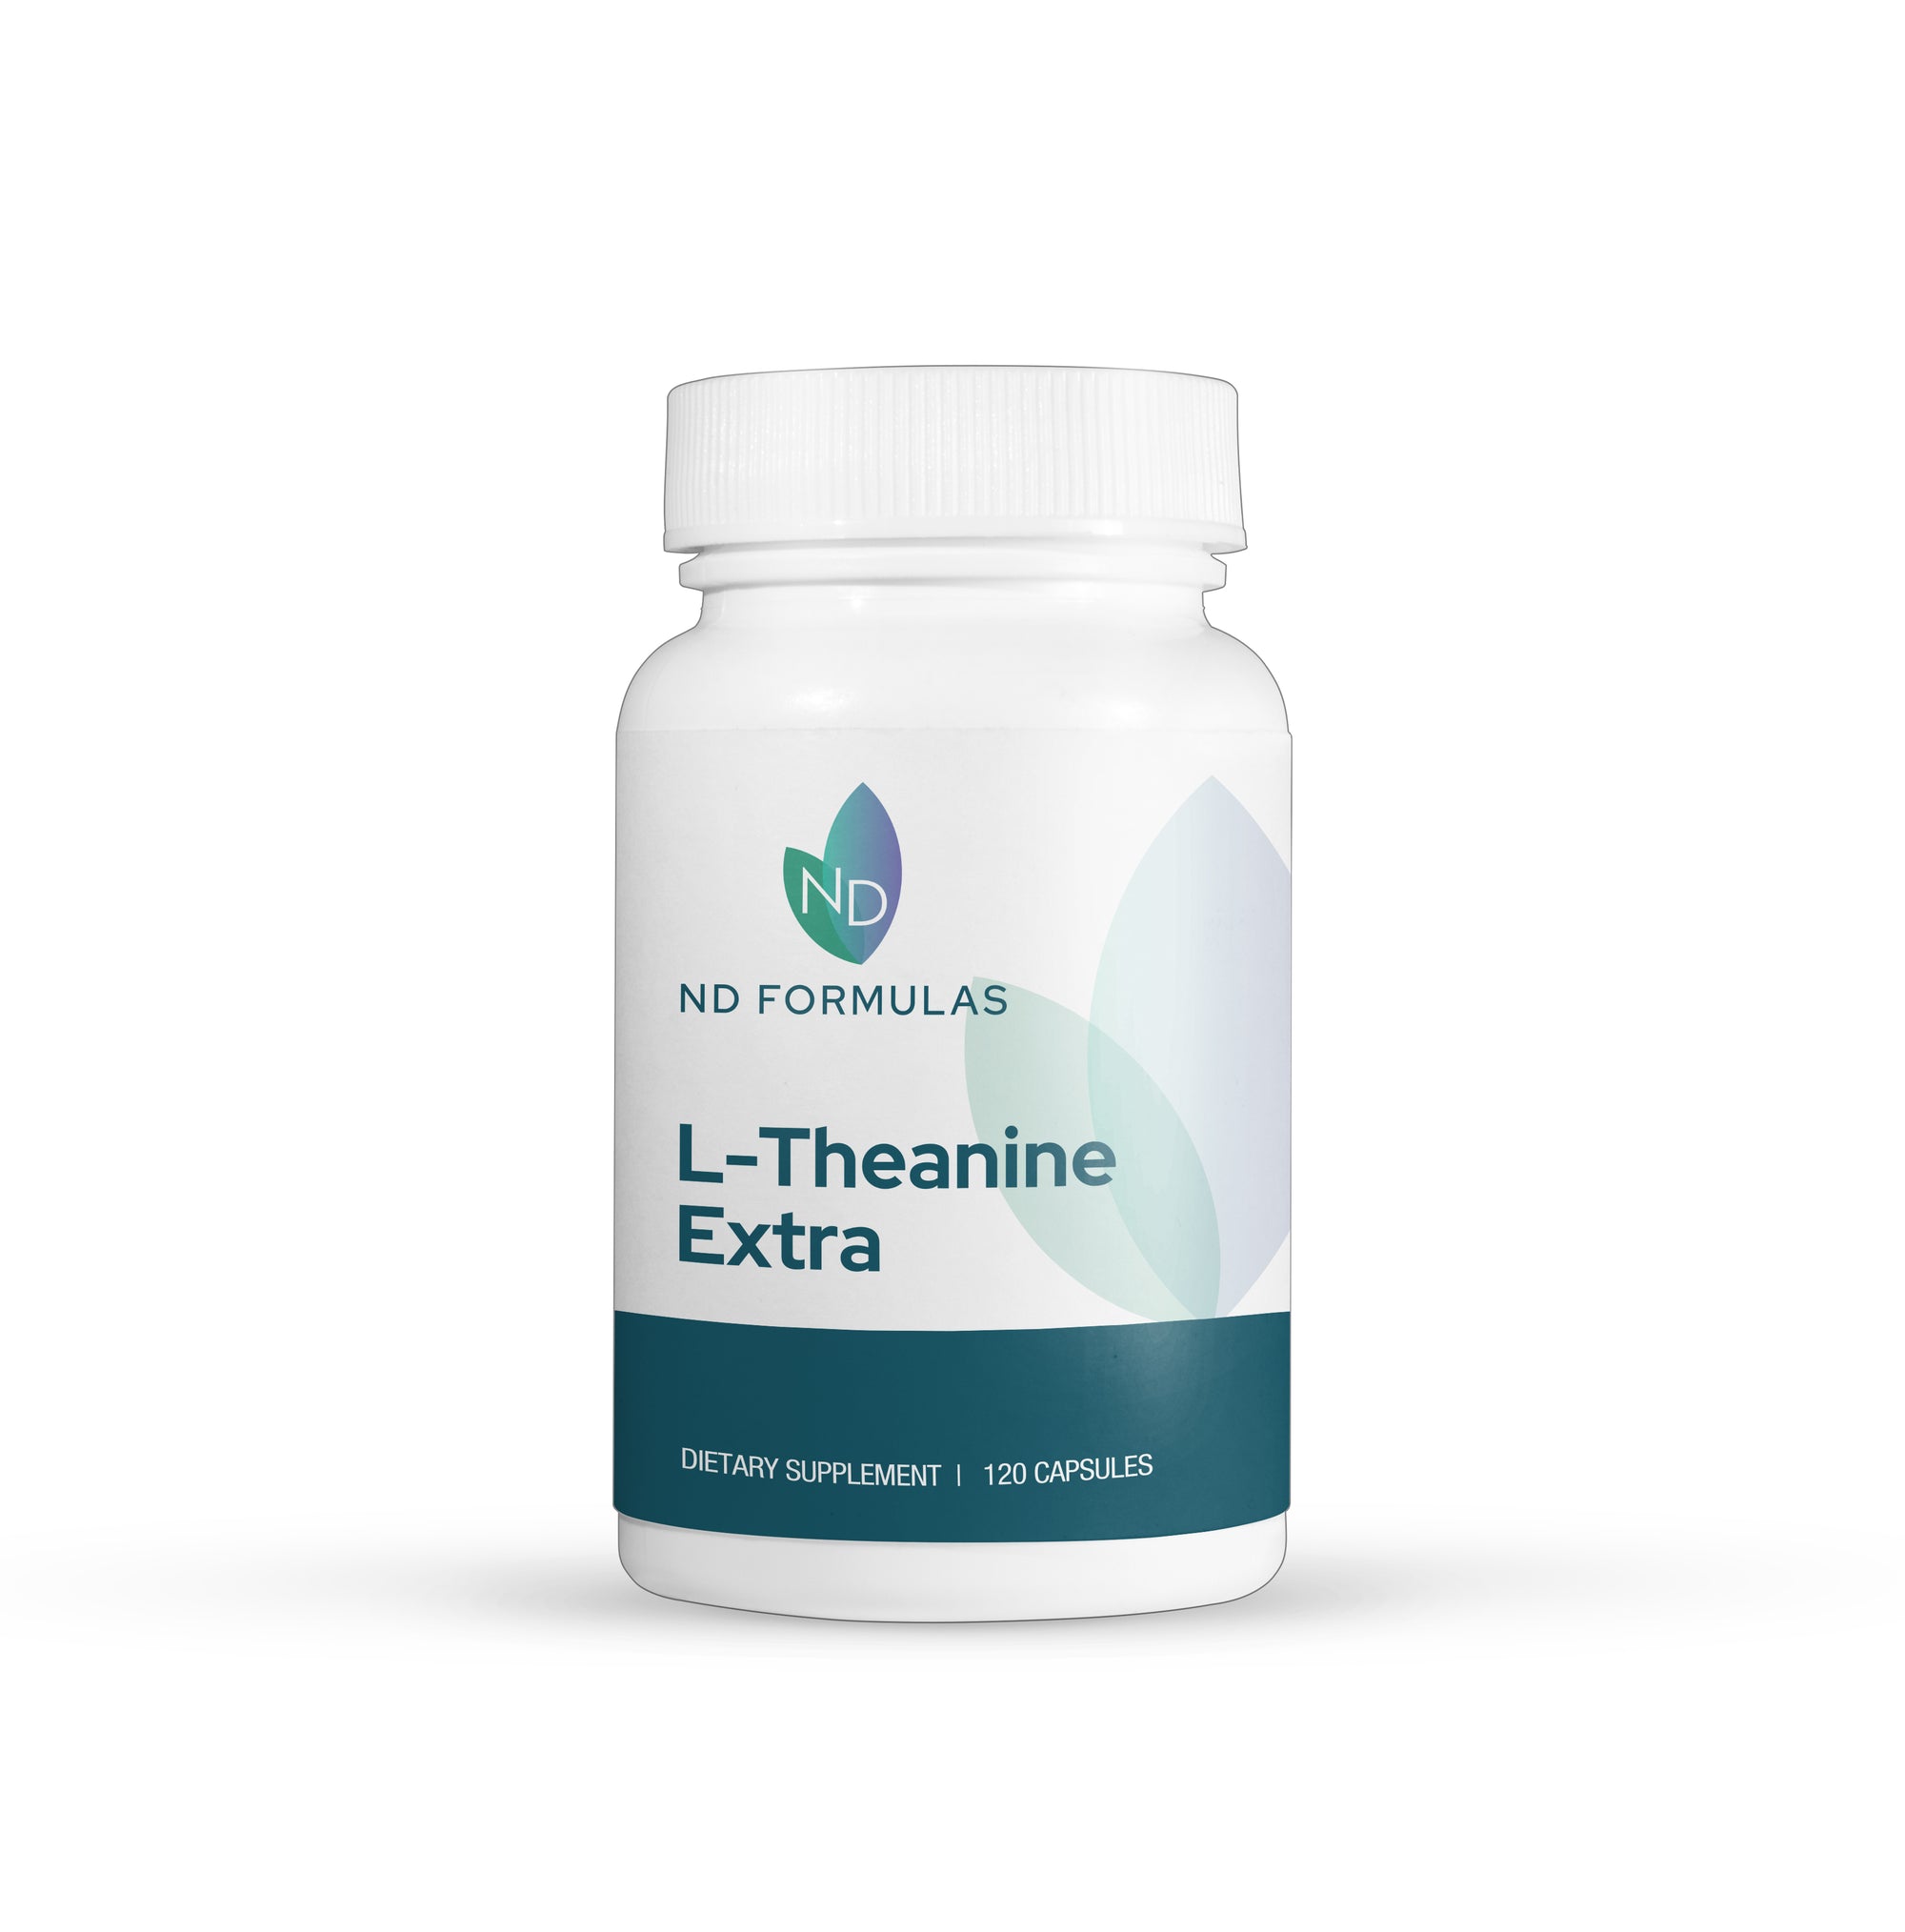 L-Theanine Extra